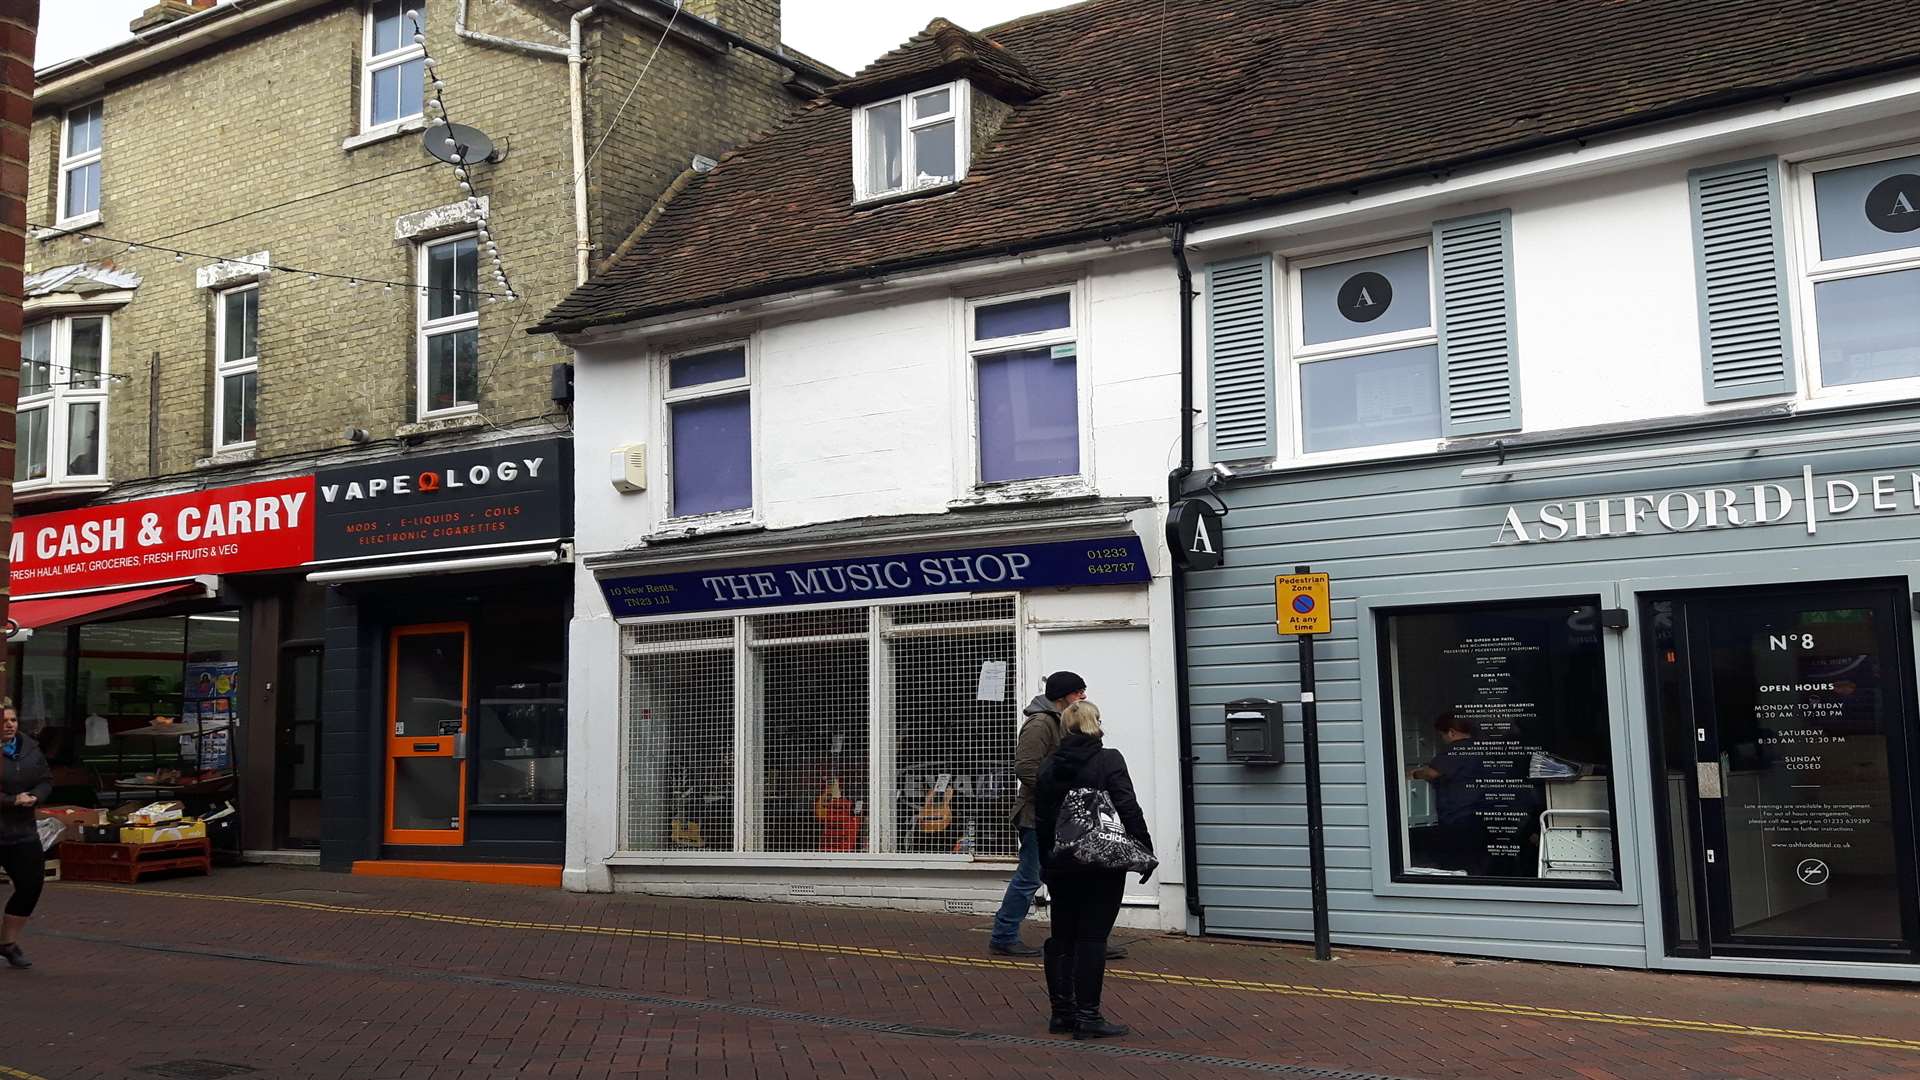 The shop in New Rents, Ashford